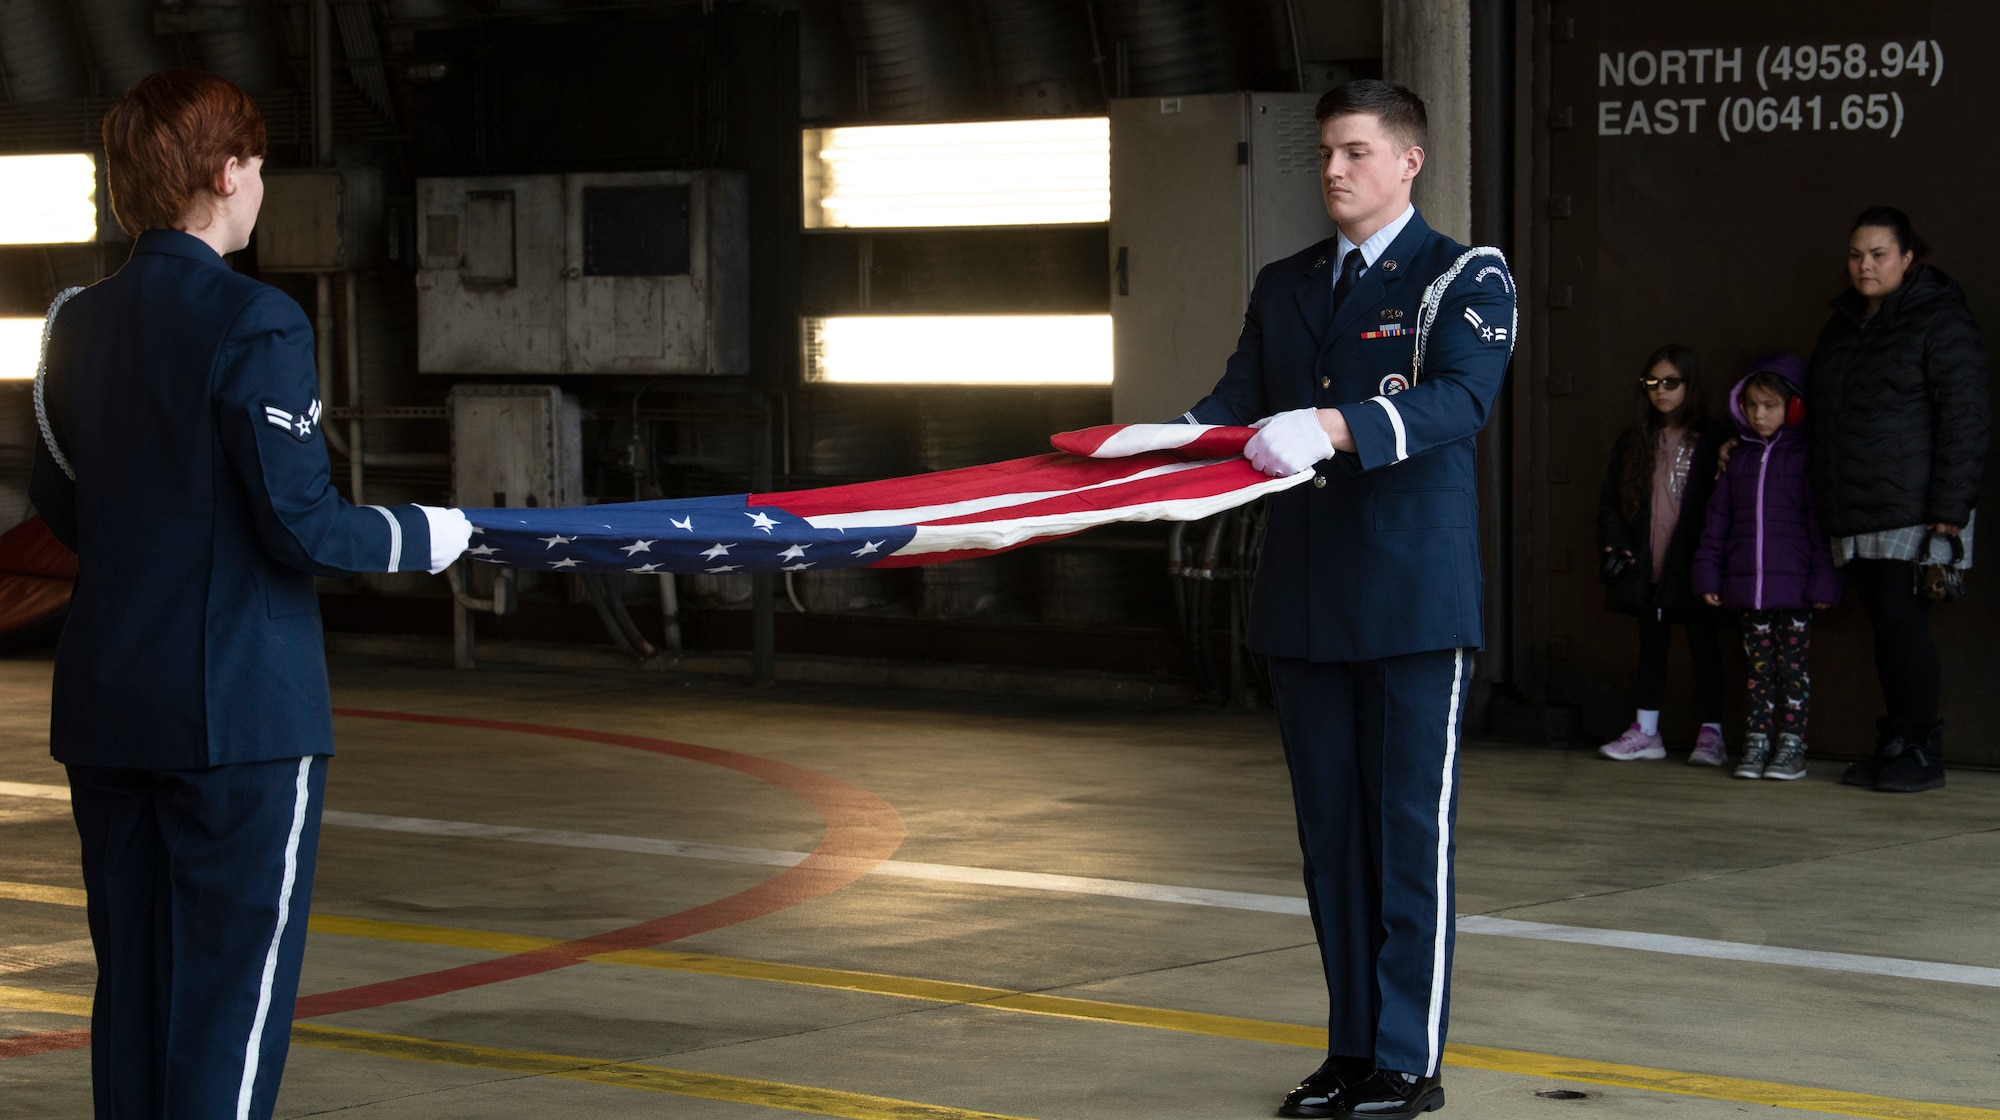 Mayfield's family was invited to the flag folding and received the flag after it was flown in an F-16